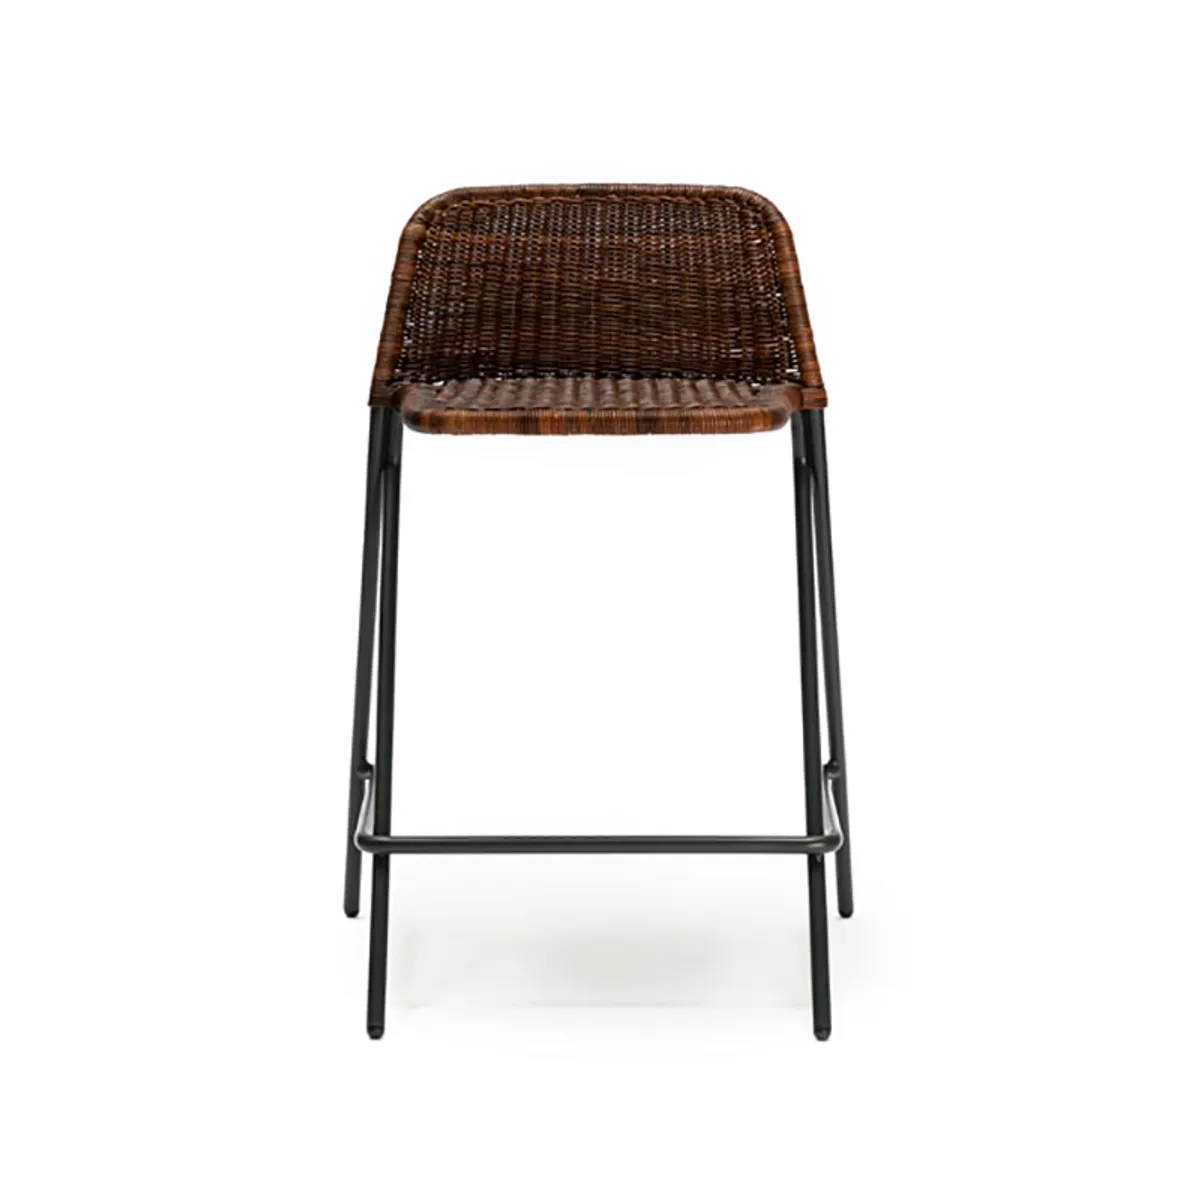 Kaki Stool With Backrest Charcoal Rust Rattan And Metal Barstool Furniture For Restaurants And Hotel Bars2